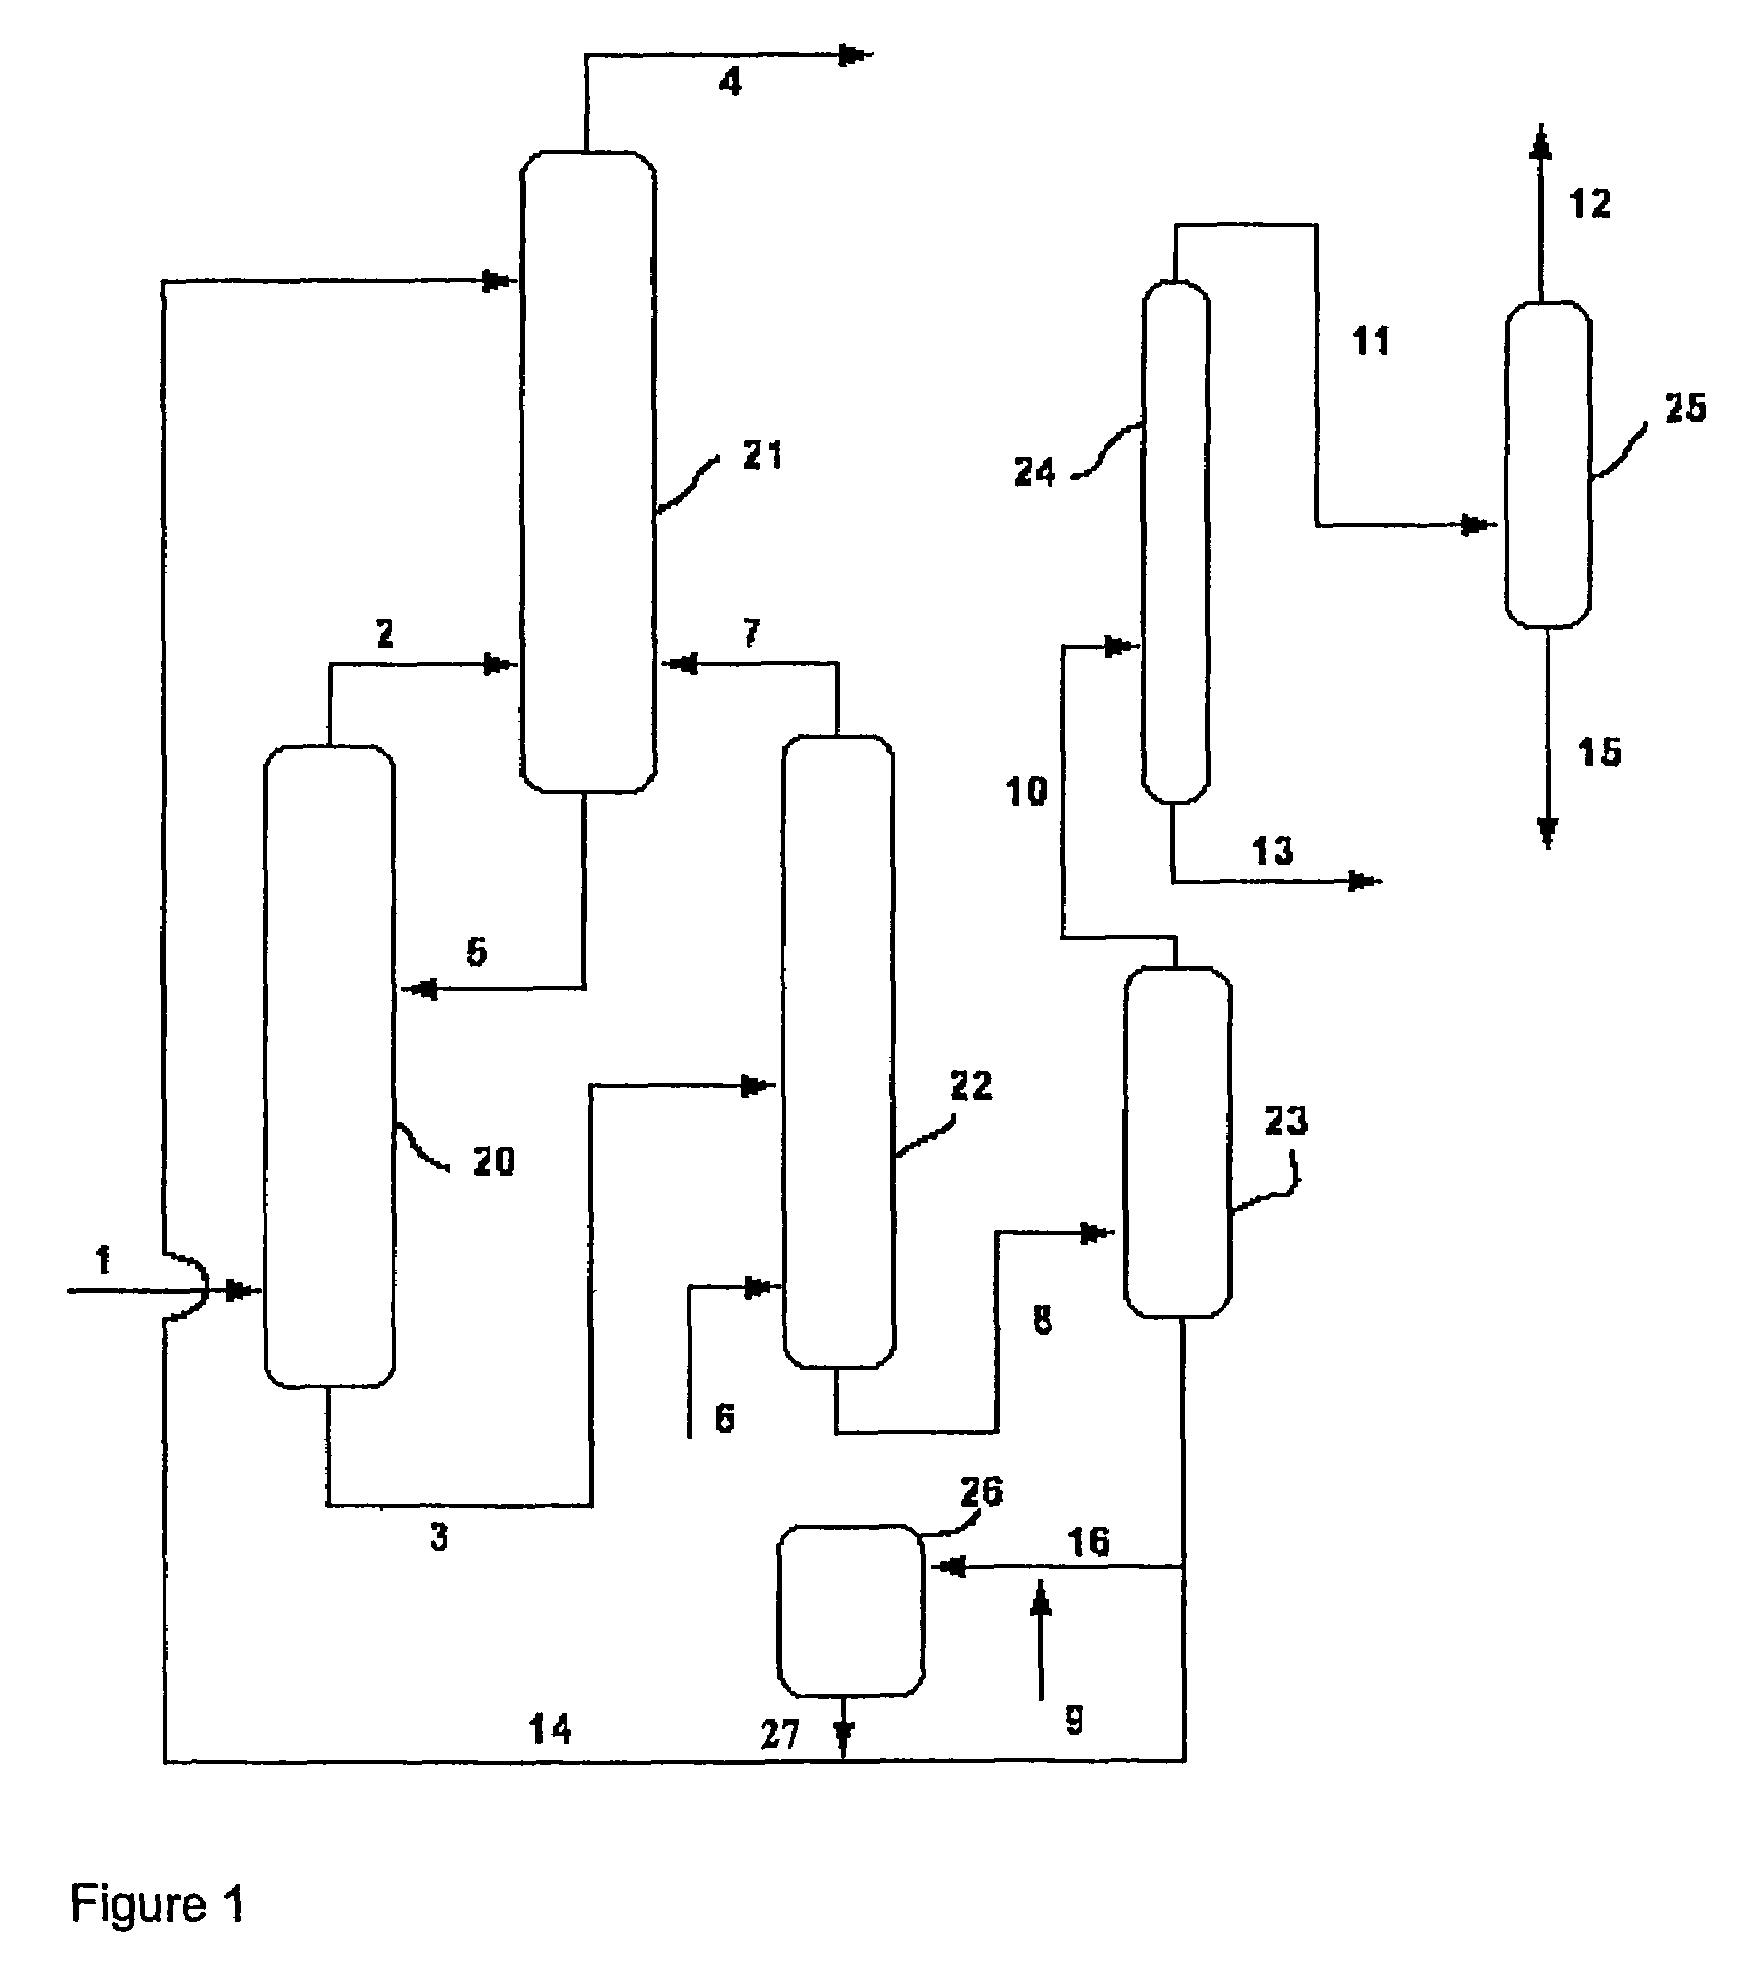 Process for recovery and recycle of ammonia from a vapor stream